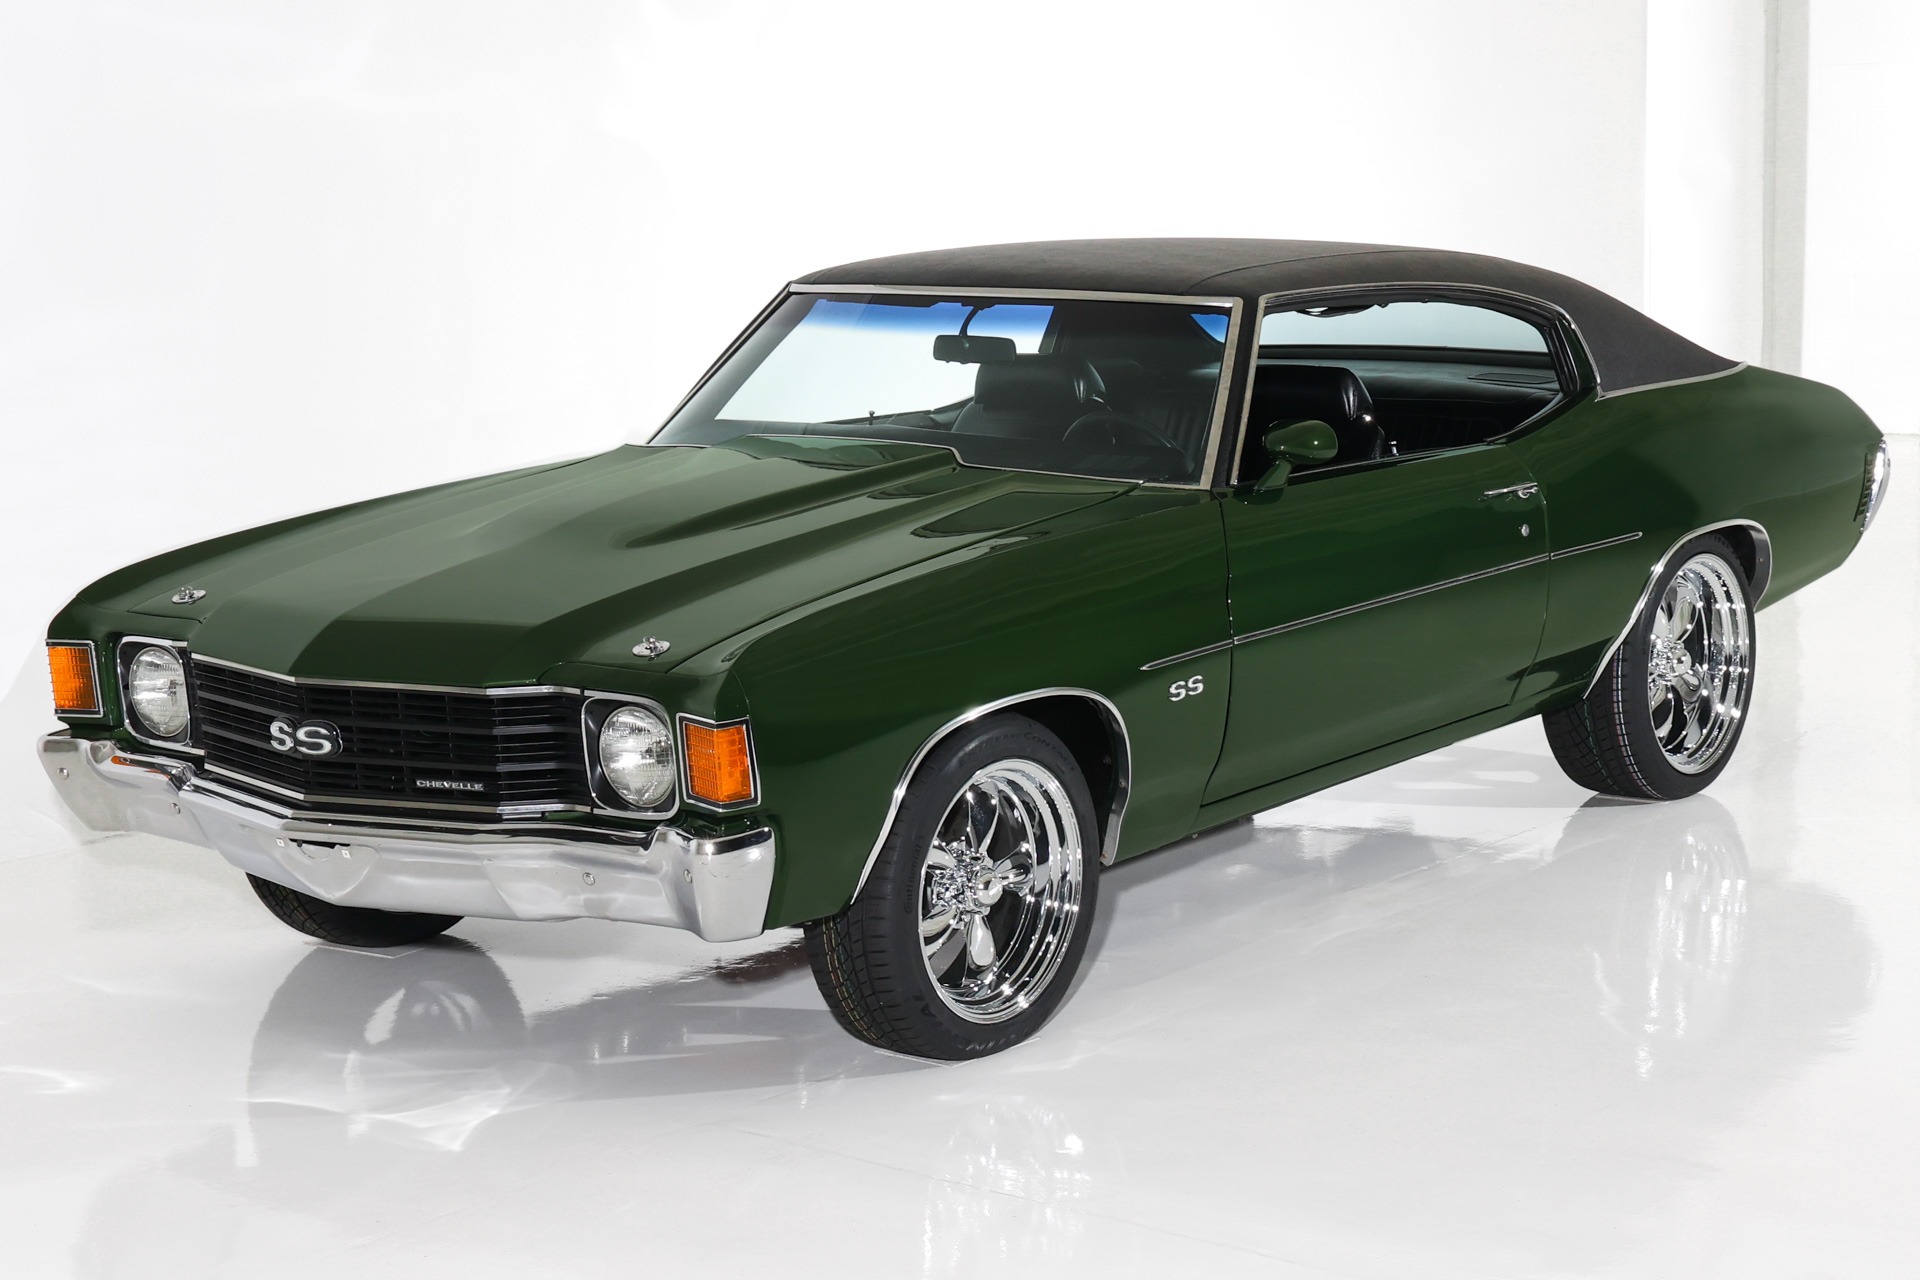 For Sale Used 1972 Chevrolet Chevelle SS Build Sheet 500hp 5-Speed | American Dream Machines Des Moines IA 50309